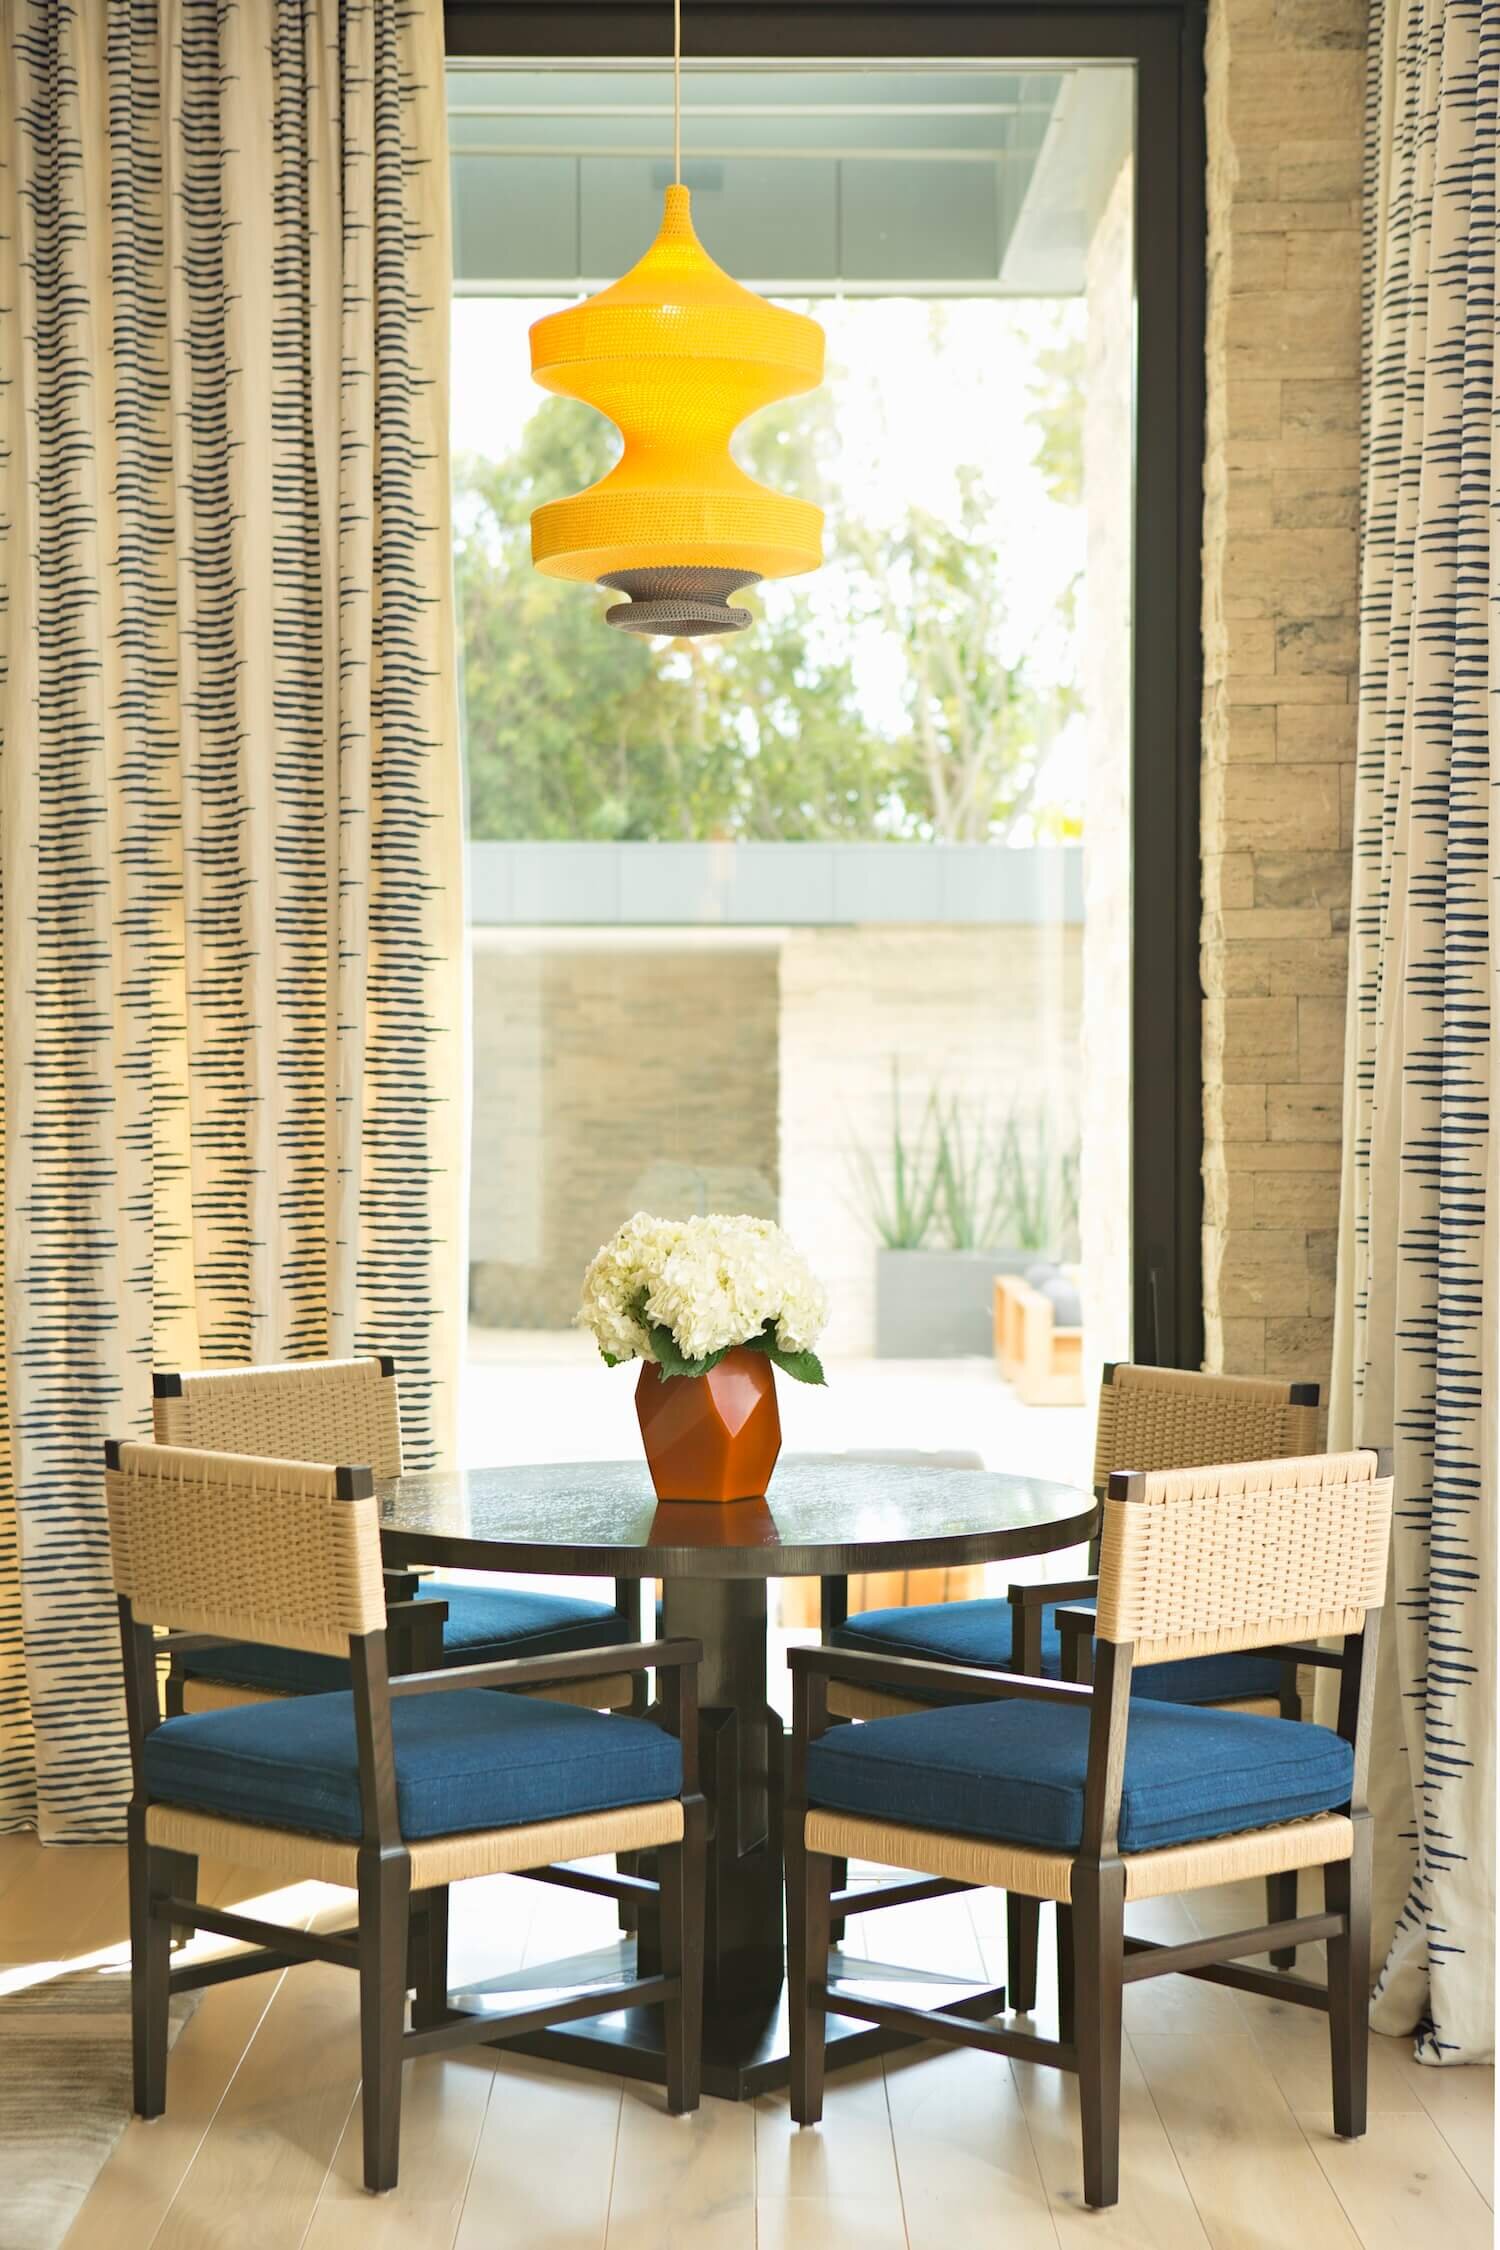 A nook with lacquered table surrounded by cobalt blue upholstered chairs and a Naomi Paul pendant light above.